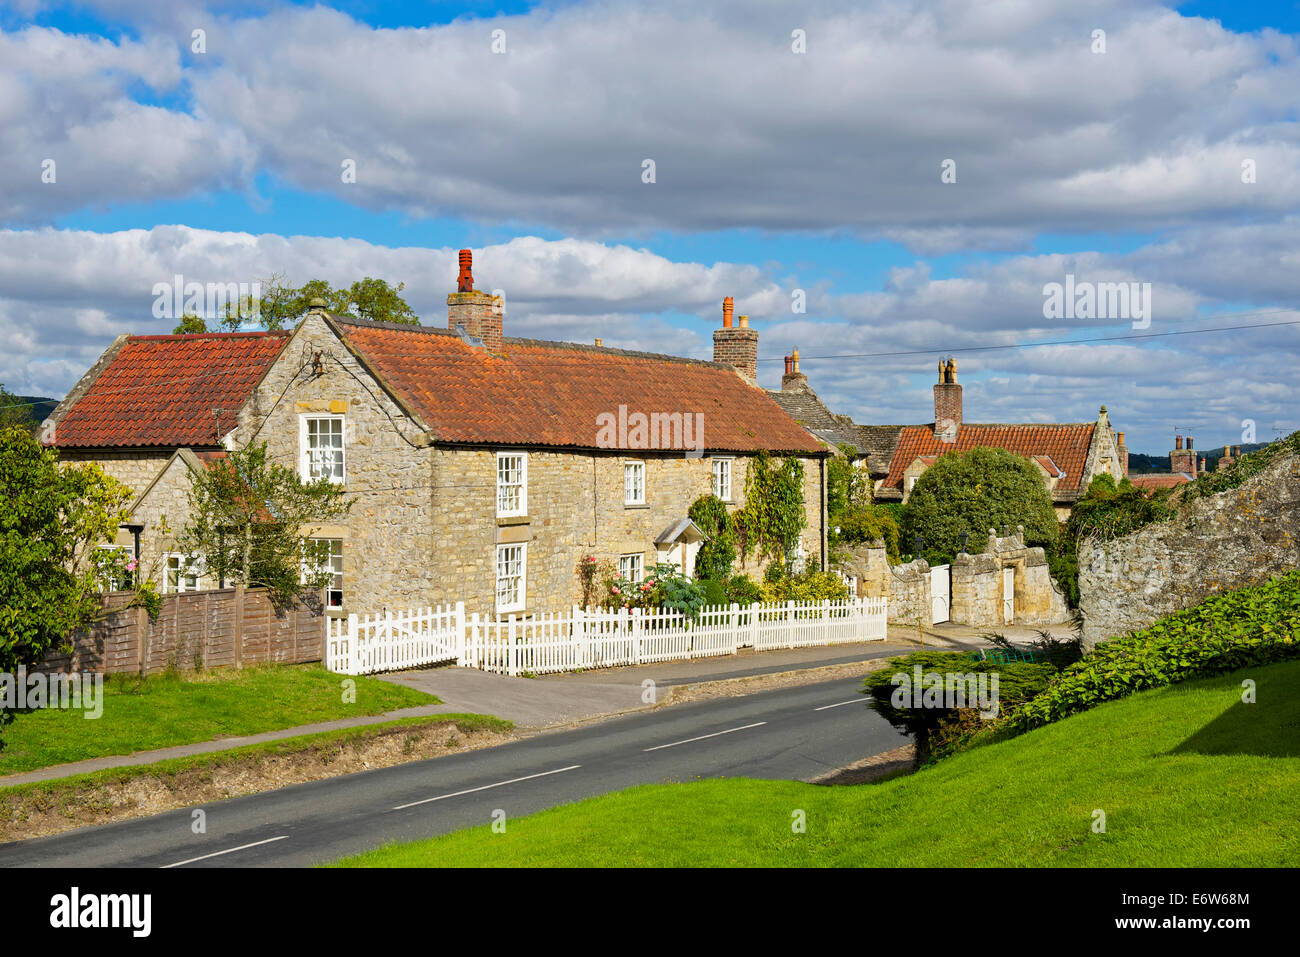 The village of Coxwold, North Yorkshire, England UK Stock Photo